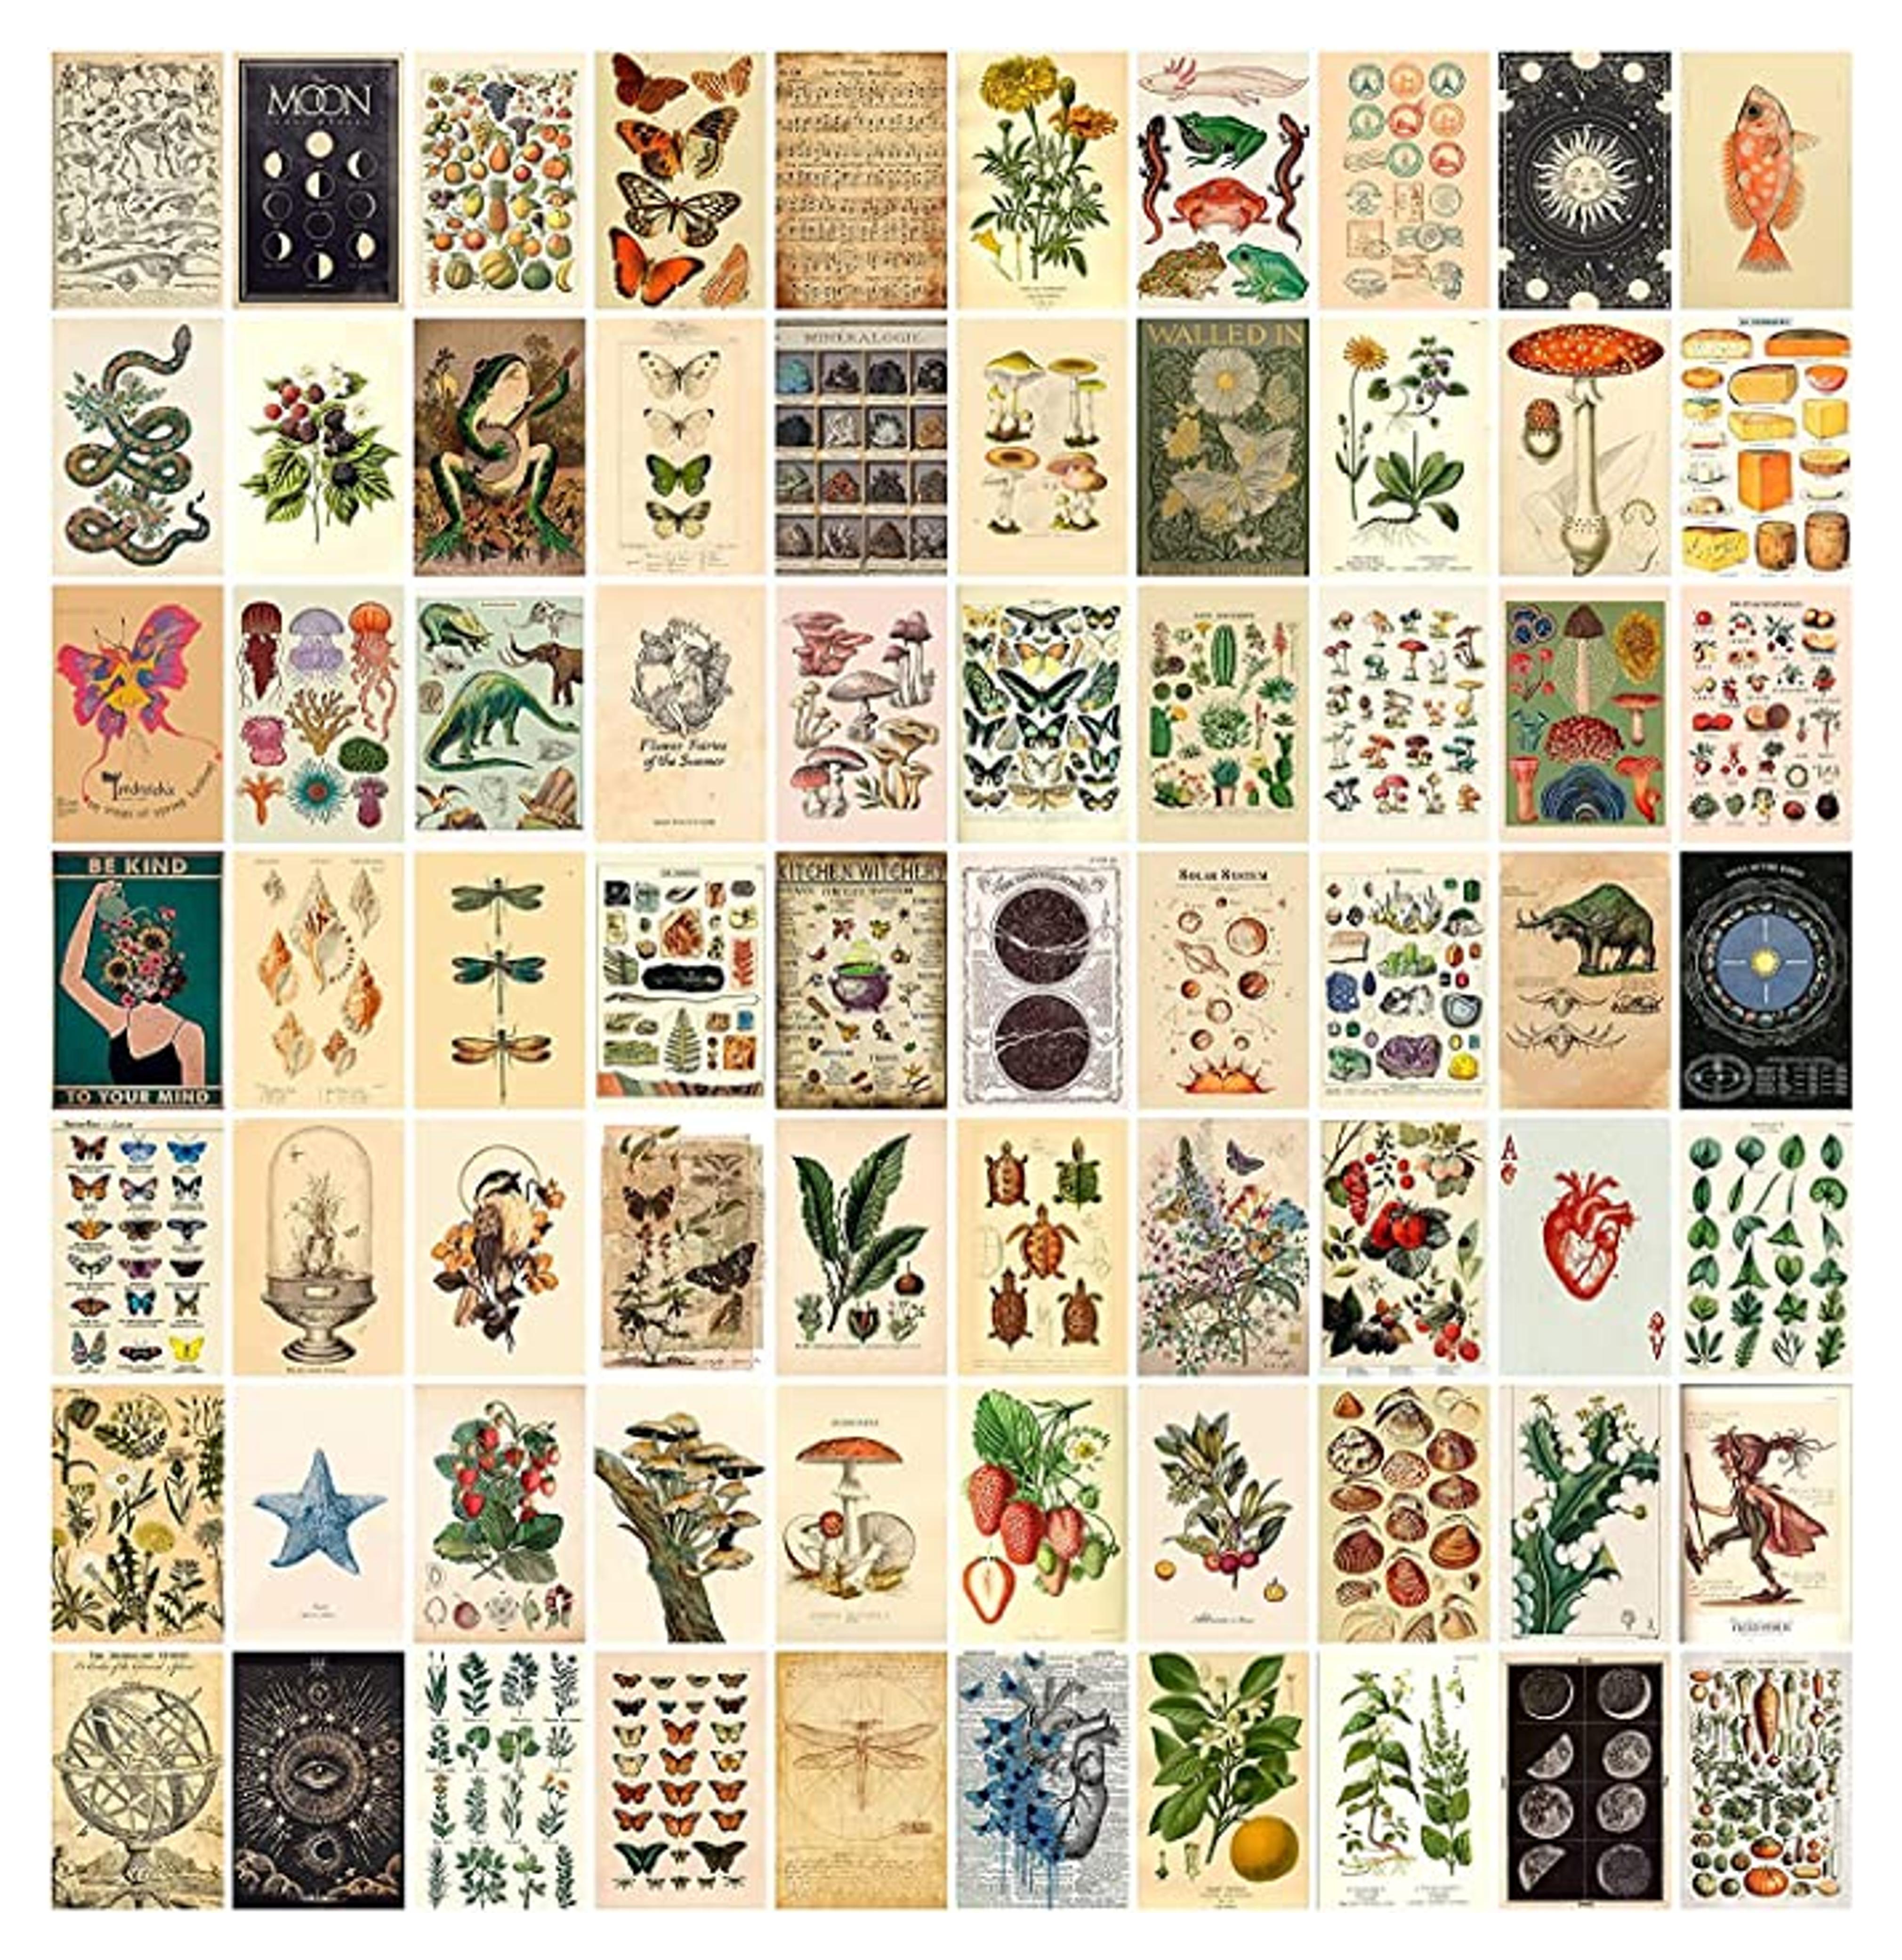 Amazon.com: Vintage Wall Collage Kit 70 pcs Aesthetic Room Decor Pictures Botanical Wall Art Illustration Dorm Decor Photo Prints Vintage Tarot Posters Trendy Bedroom Decor for Teen Girls (yellow) : Home & Kitchen